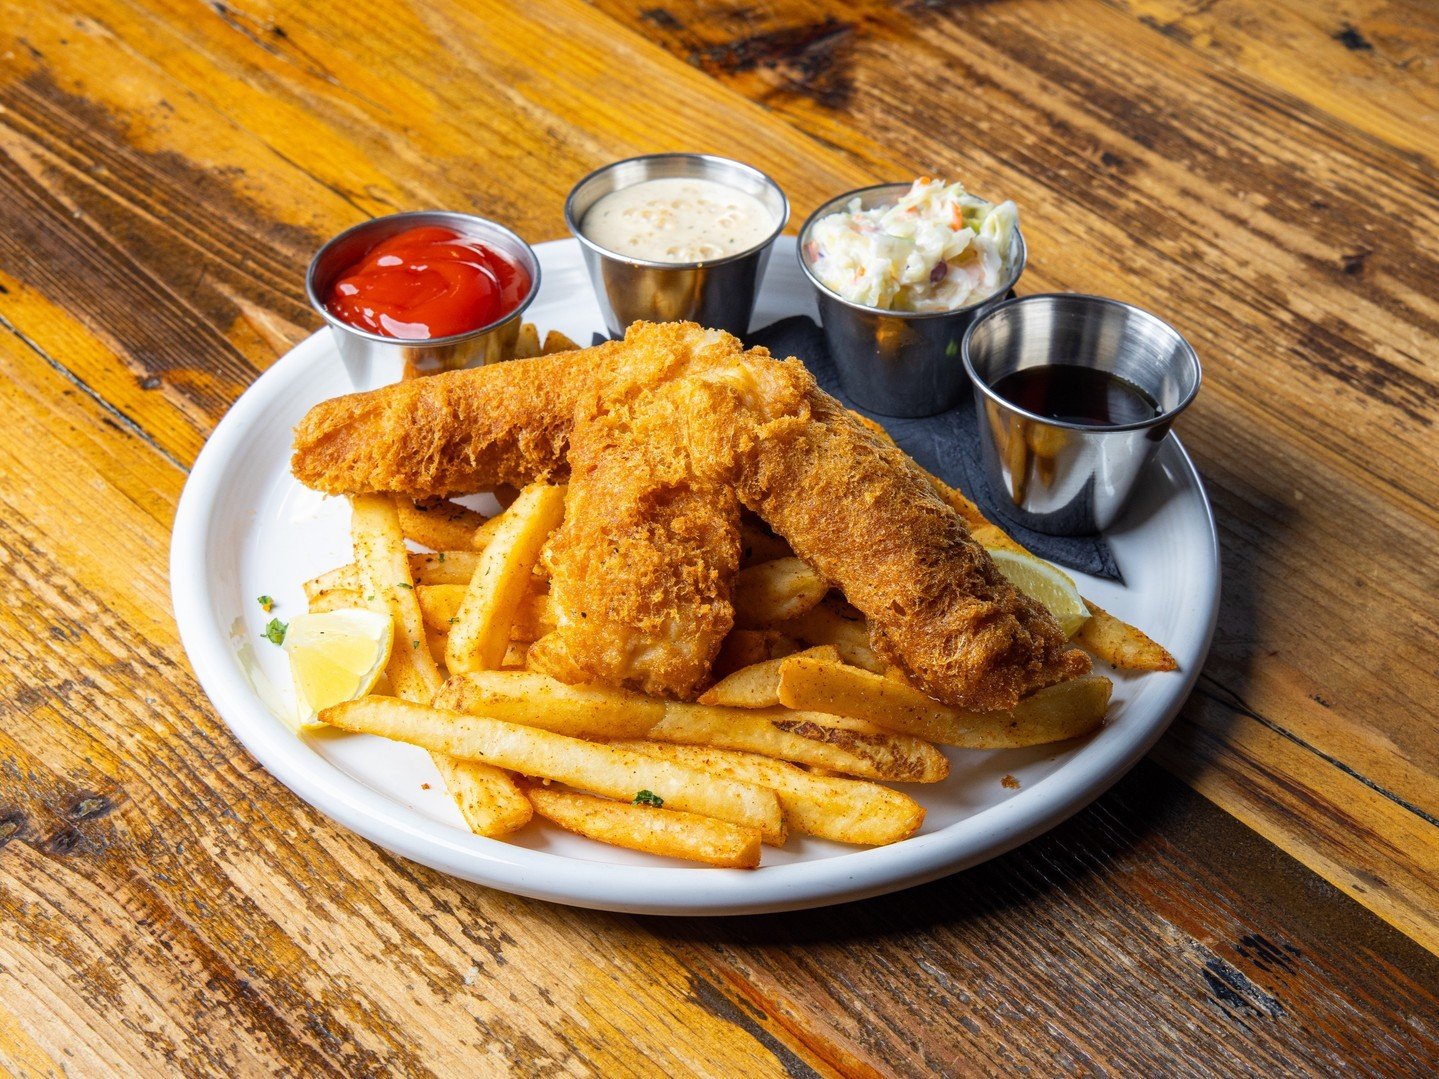 IYKYK... 😏🐟! The Fish &amp; Chips is on special TODAY for $2 off!
 
👉 Reserve a table: https://bit.ly/3Souk7z
👉 Order Carryout: https://bit.ly/3ISncMF